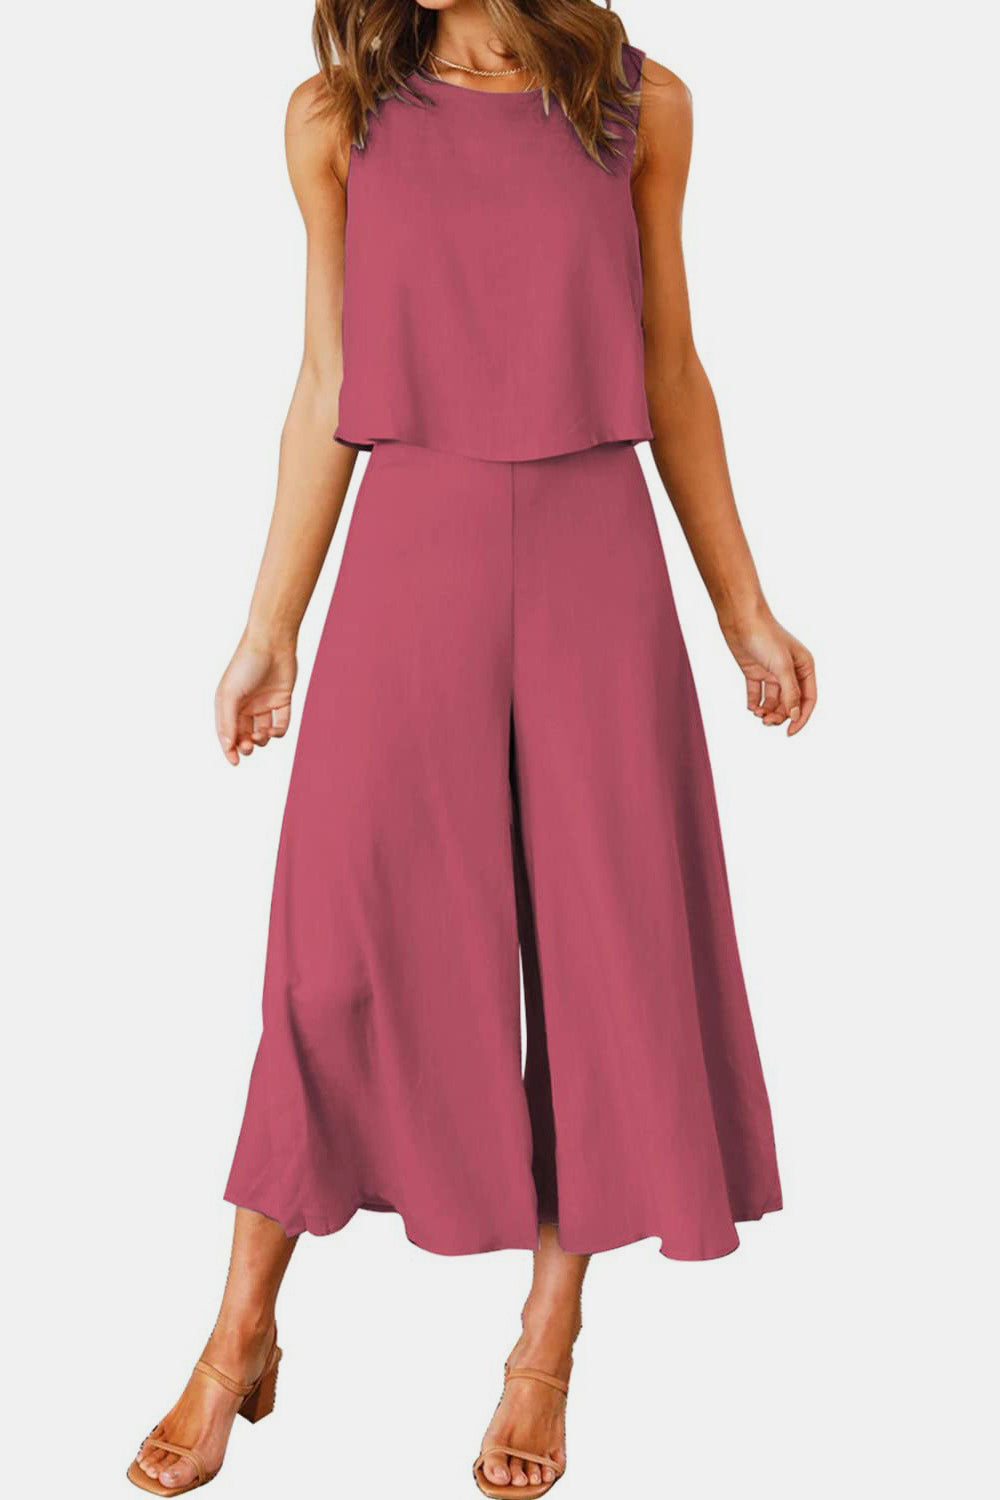 Rose Culottes Outfit 